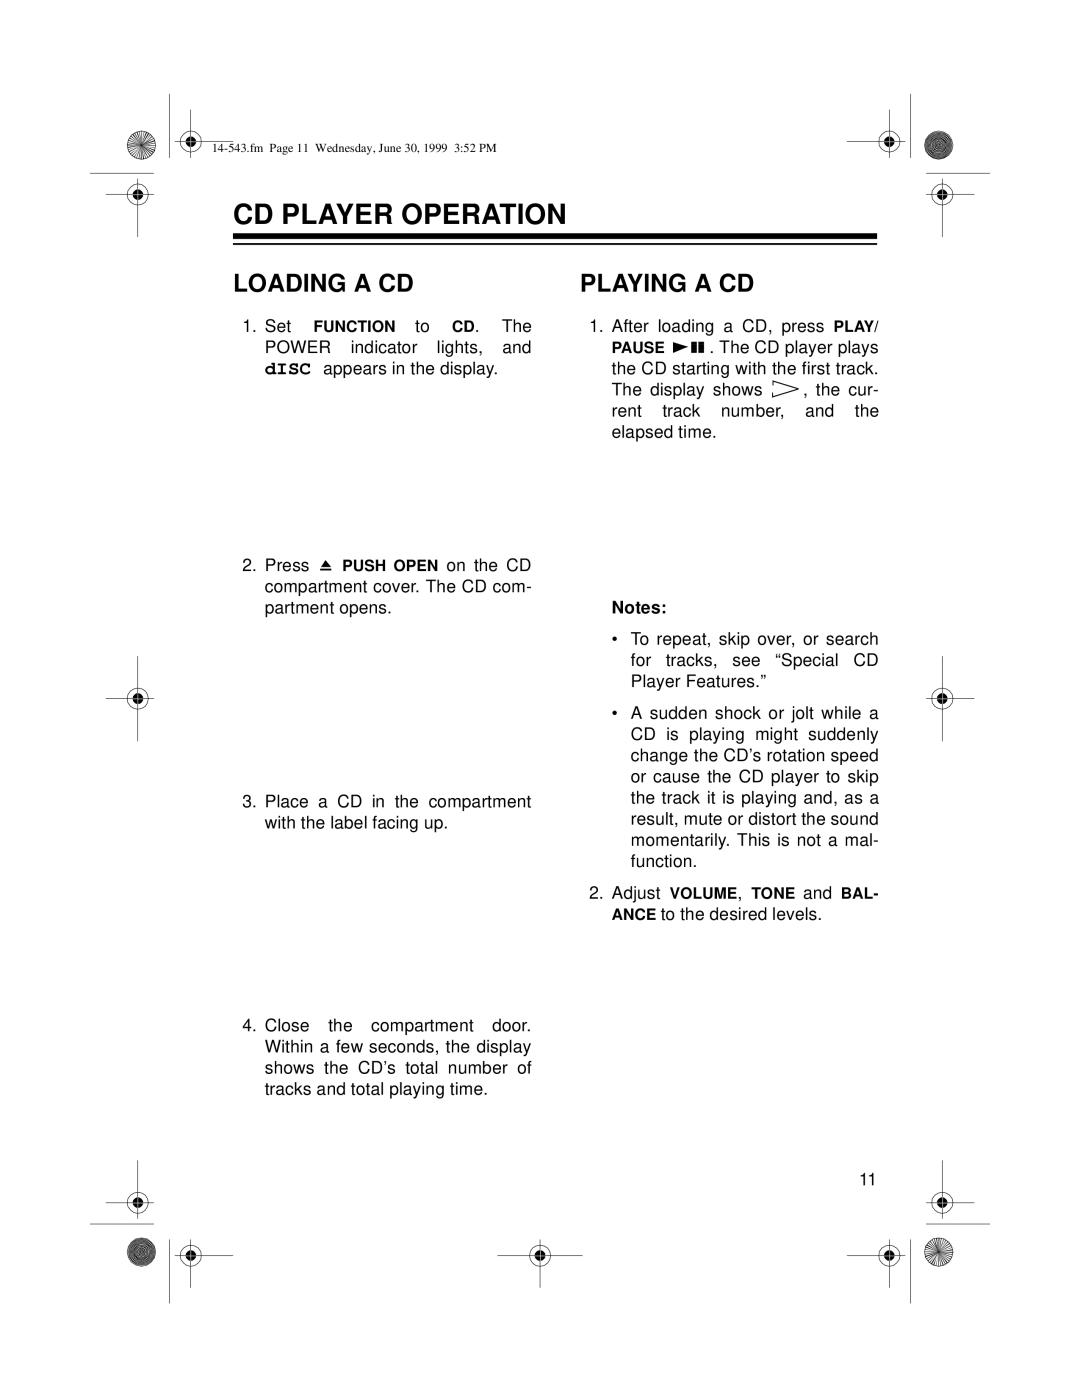 Radio Shack CD-3319 owner manual Cd Player Operation, Loading A Cd, Playing A Cd 